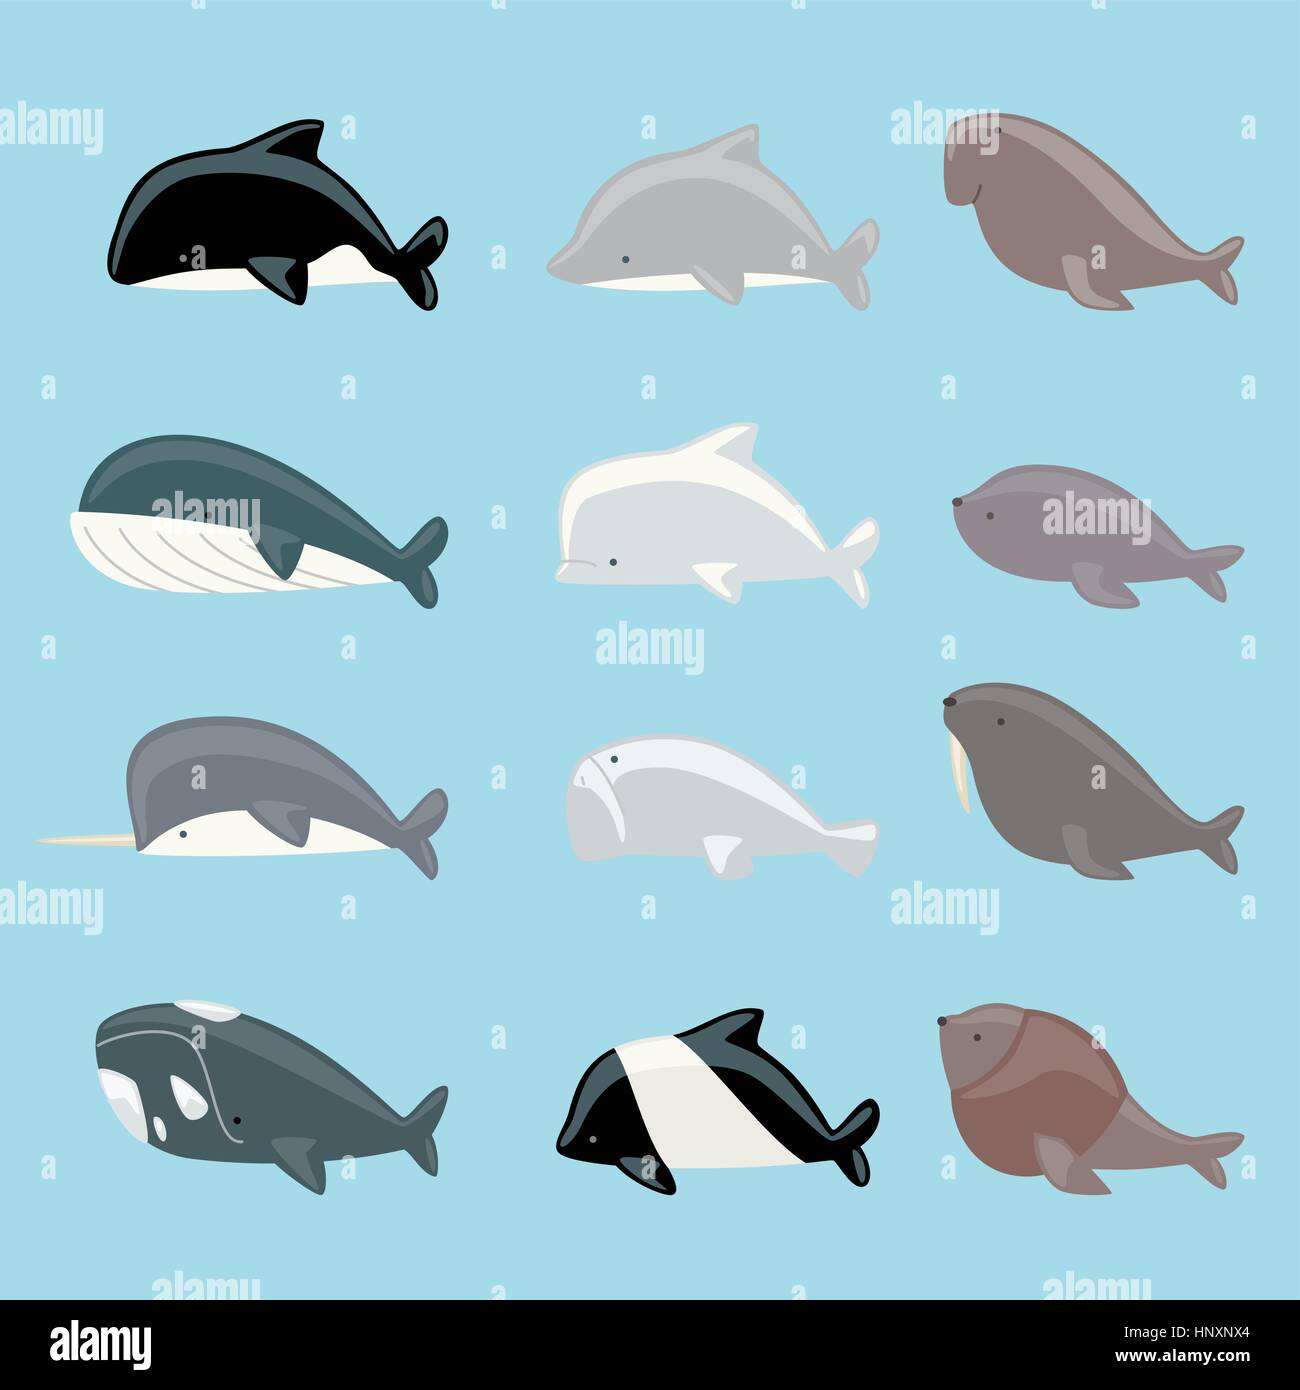 Marine mammals icon collection, with whale, dolphin, manatee, beluga, killer whale, narwhal, walrus, sea lion, blue whale vector illustration. Stock Vector